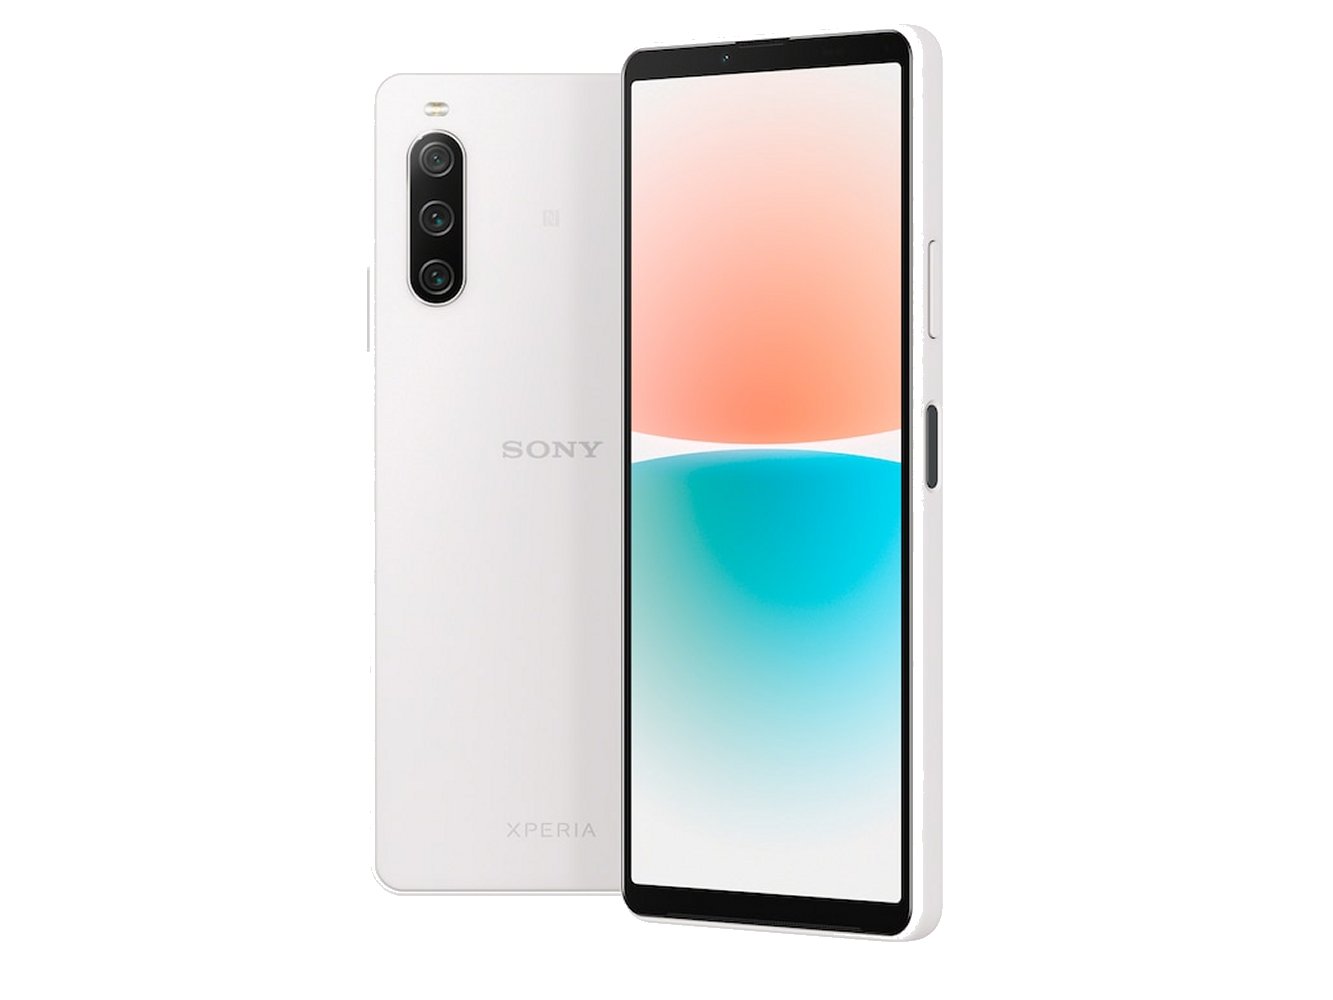 Sony Xperia 10 IV: Tiny smartphone in a practical 21:9 format